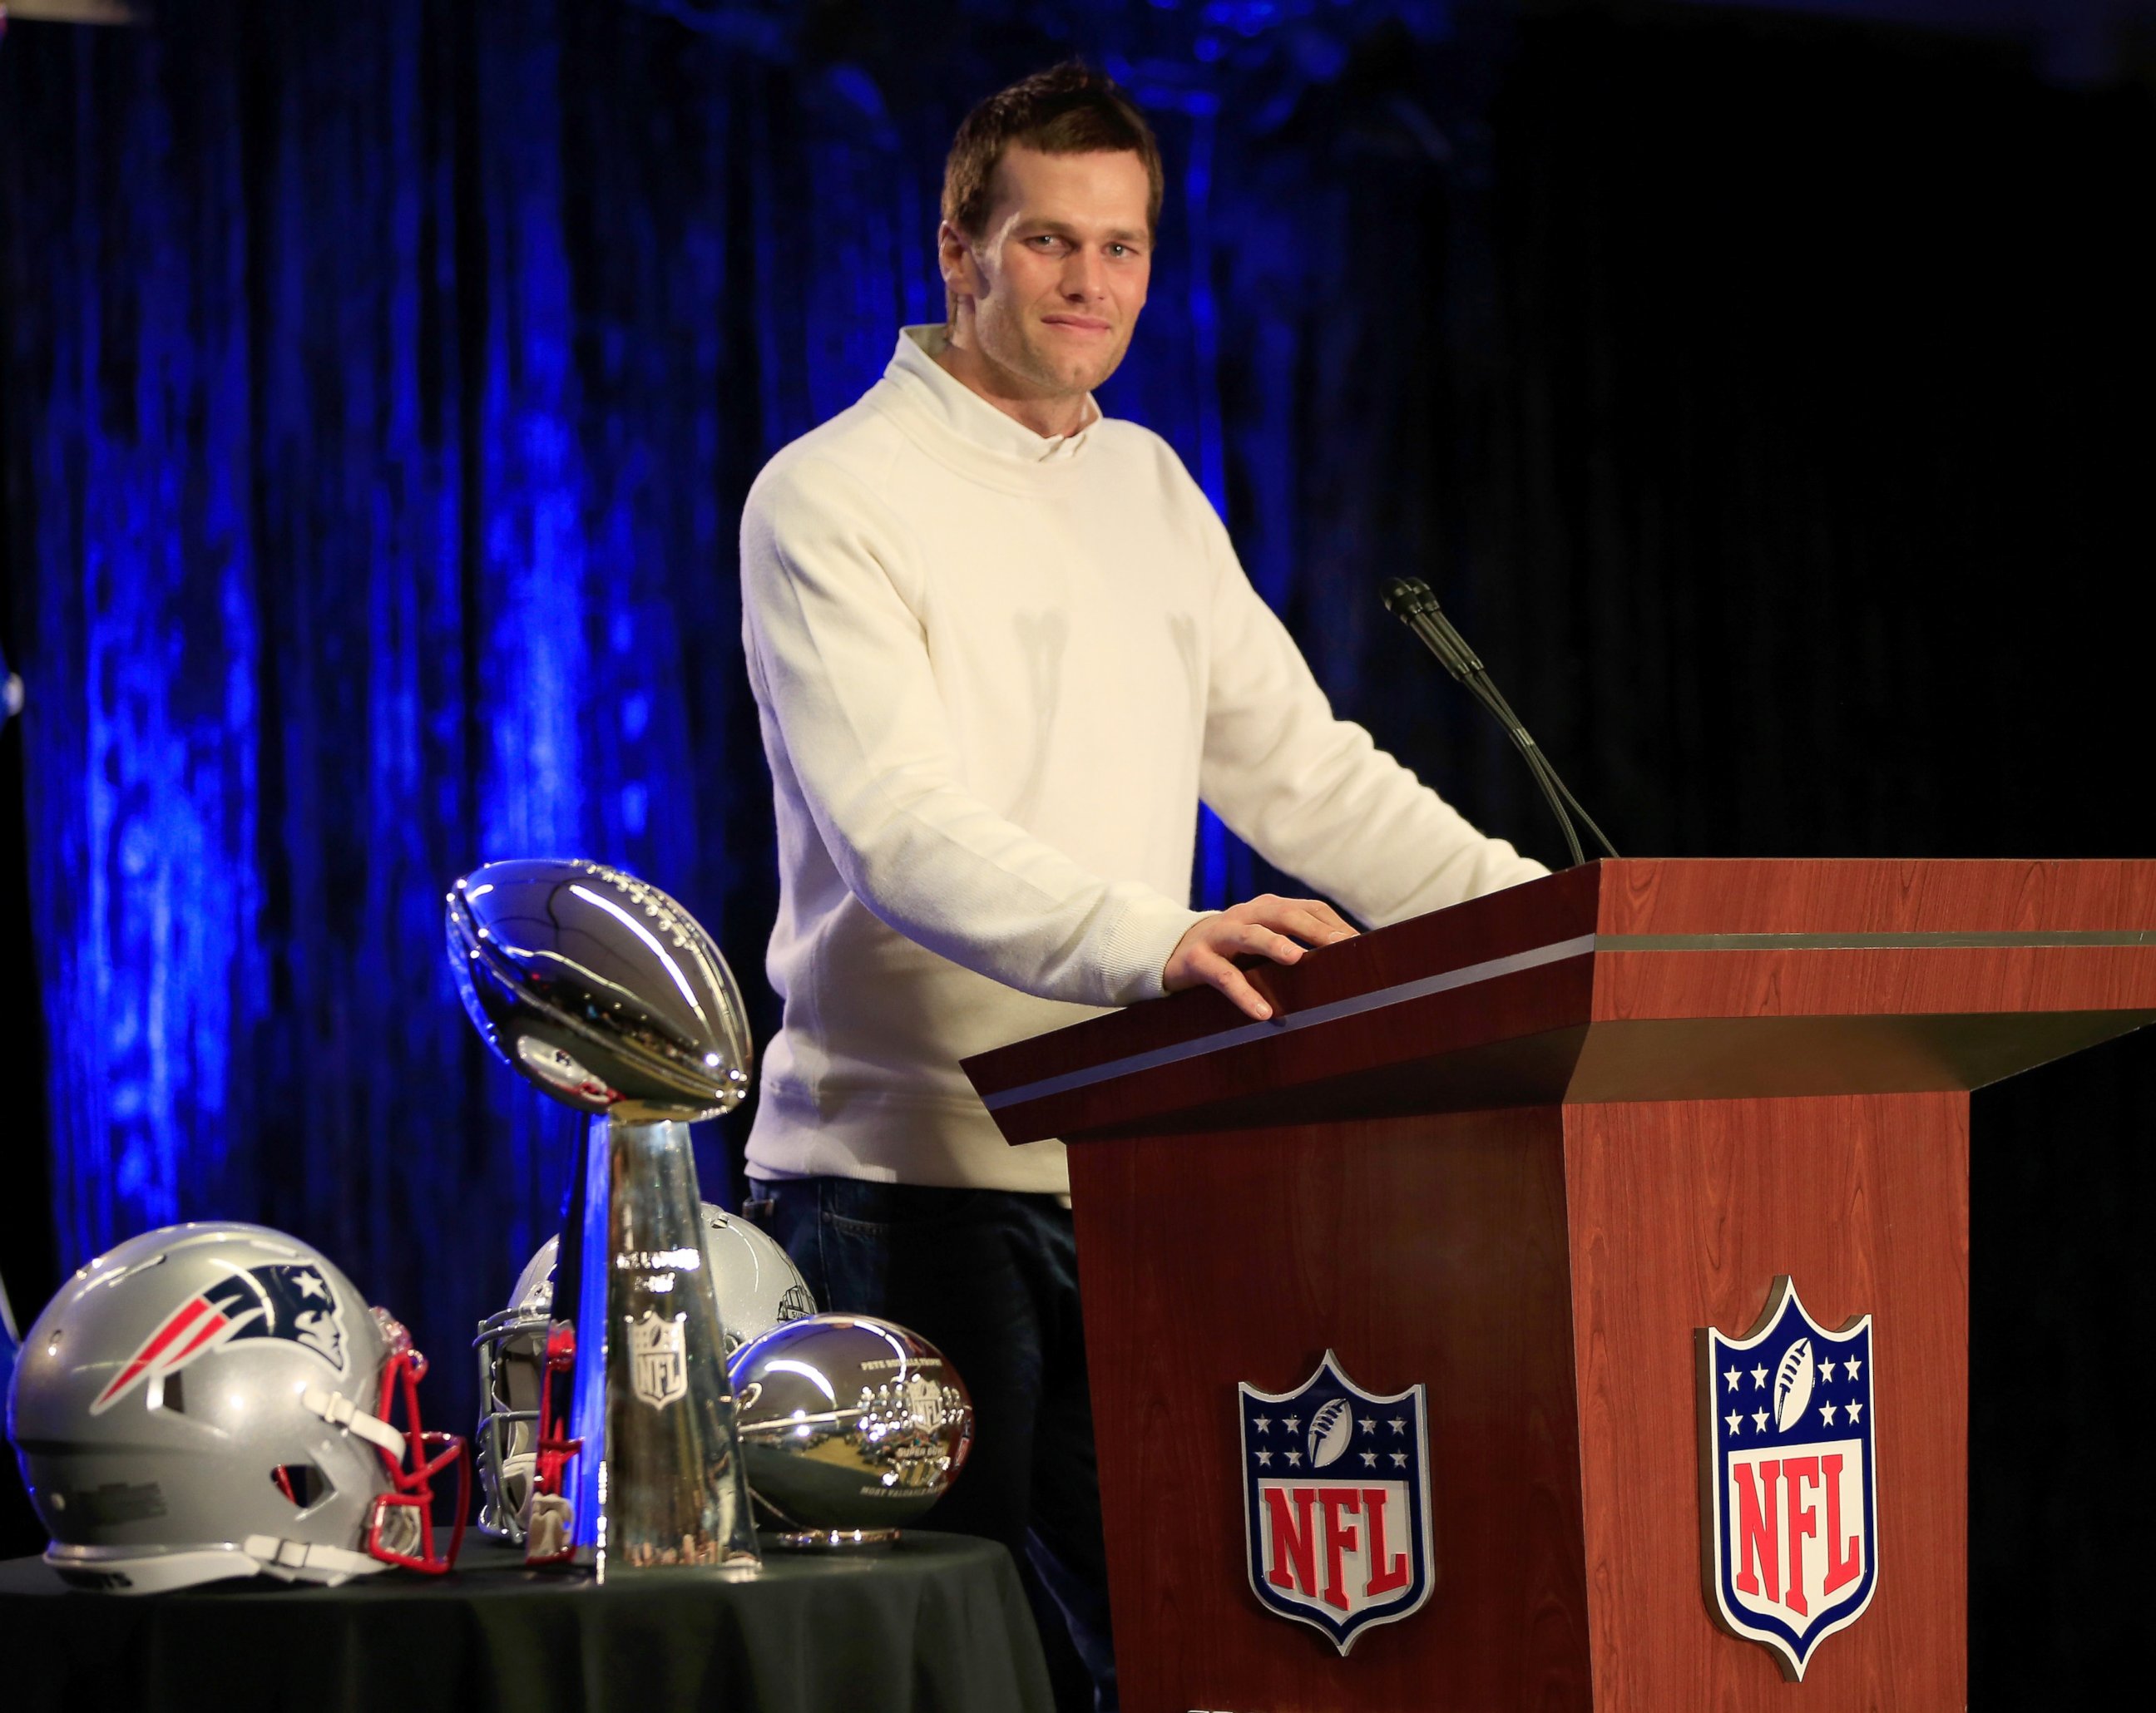 PHOTO: Tom Brady of the New England Patriots talks with the media during a Chevrolet Super Bowl XLIX MVP press conference, Feb. 2, 2015, in Phoenix.